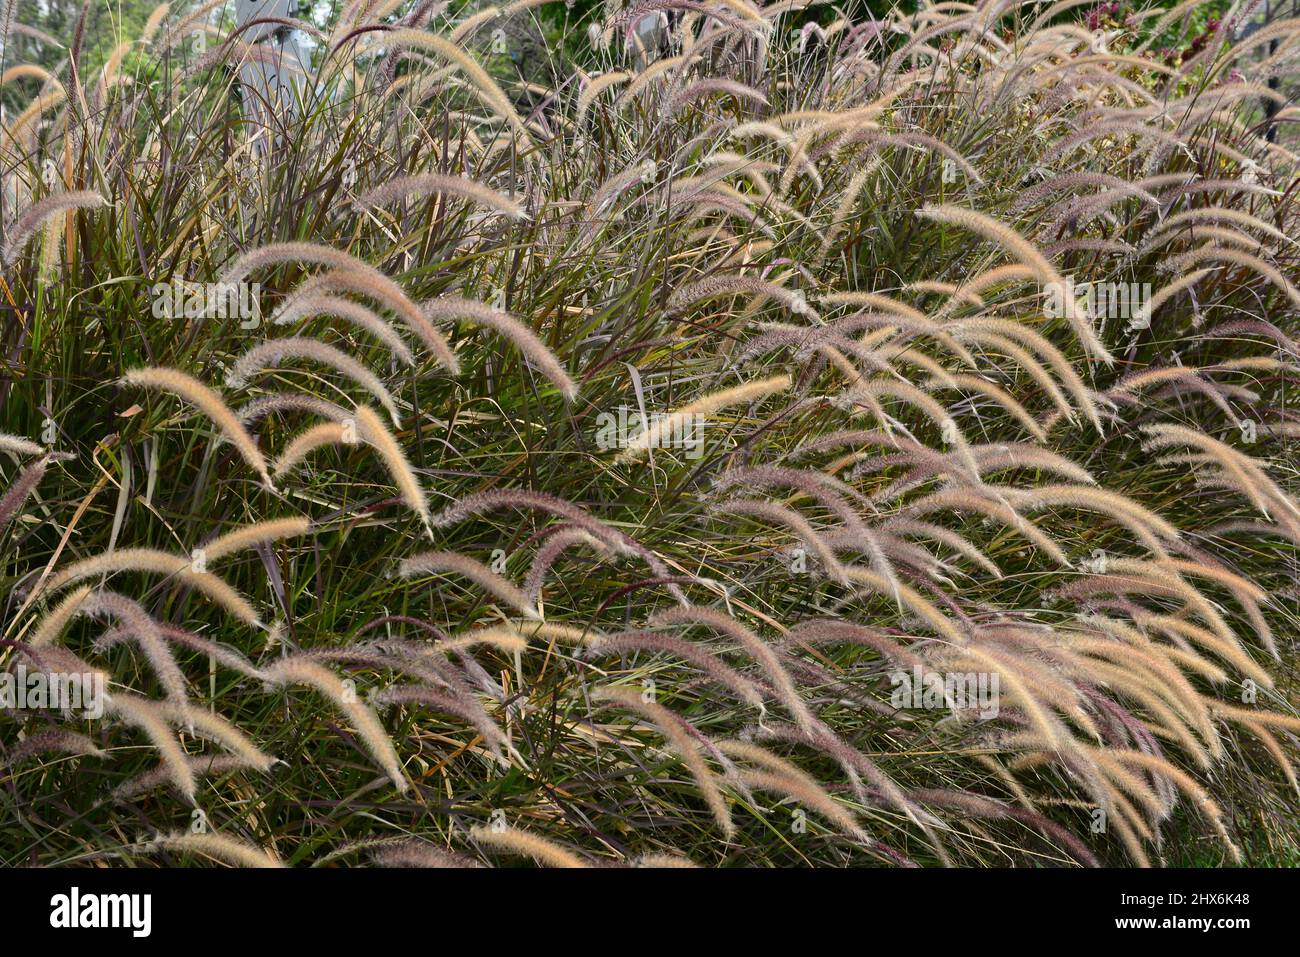 fountain grass is spectacular when backlit by the rising or setting sun. Named for its especially graceful spray of foliage, fountaingrass also sends Stock Photo